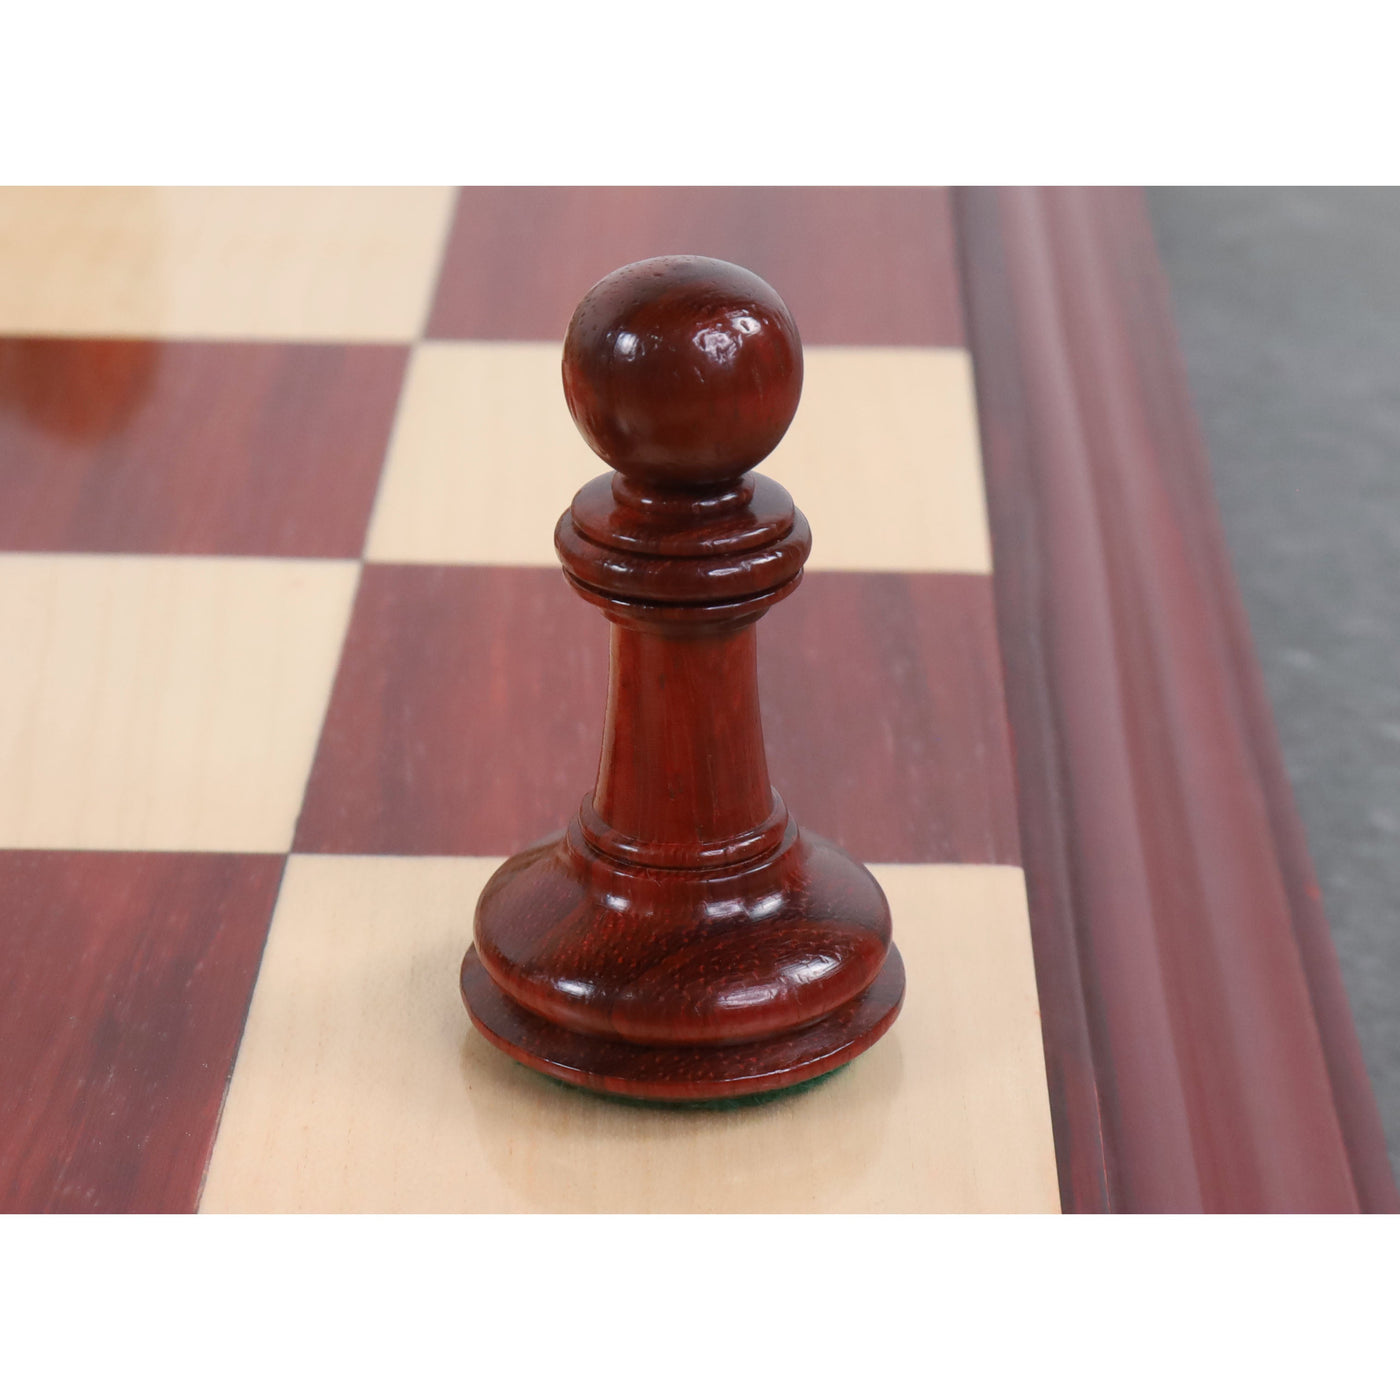 Slightly Imperfect 4.6" Bath Luxury Staunton Chess Set - Chess Pieces Only - Bud Rosewood - Triple Weight